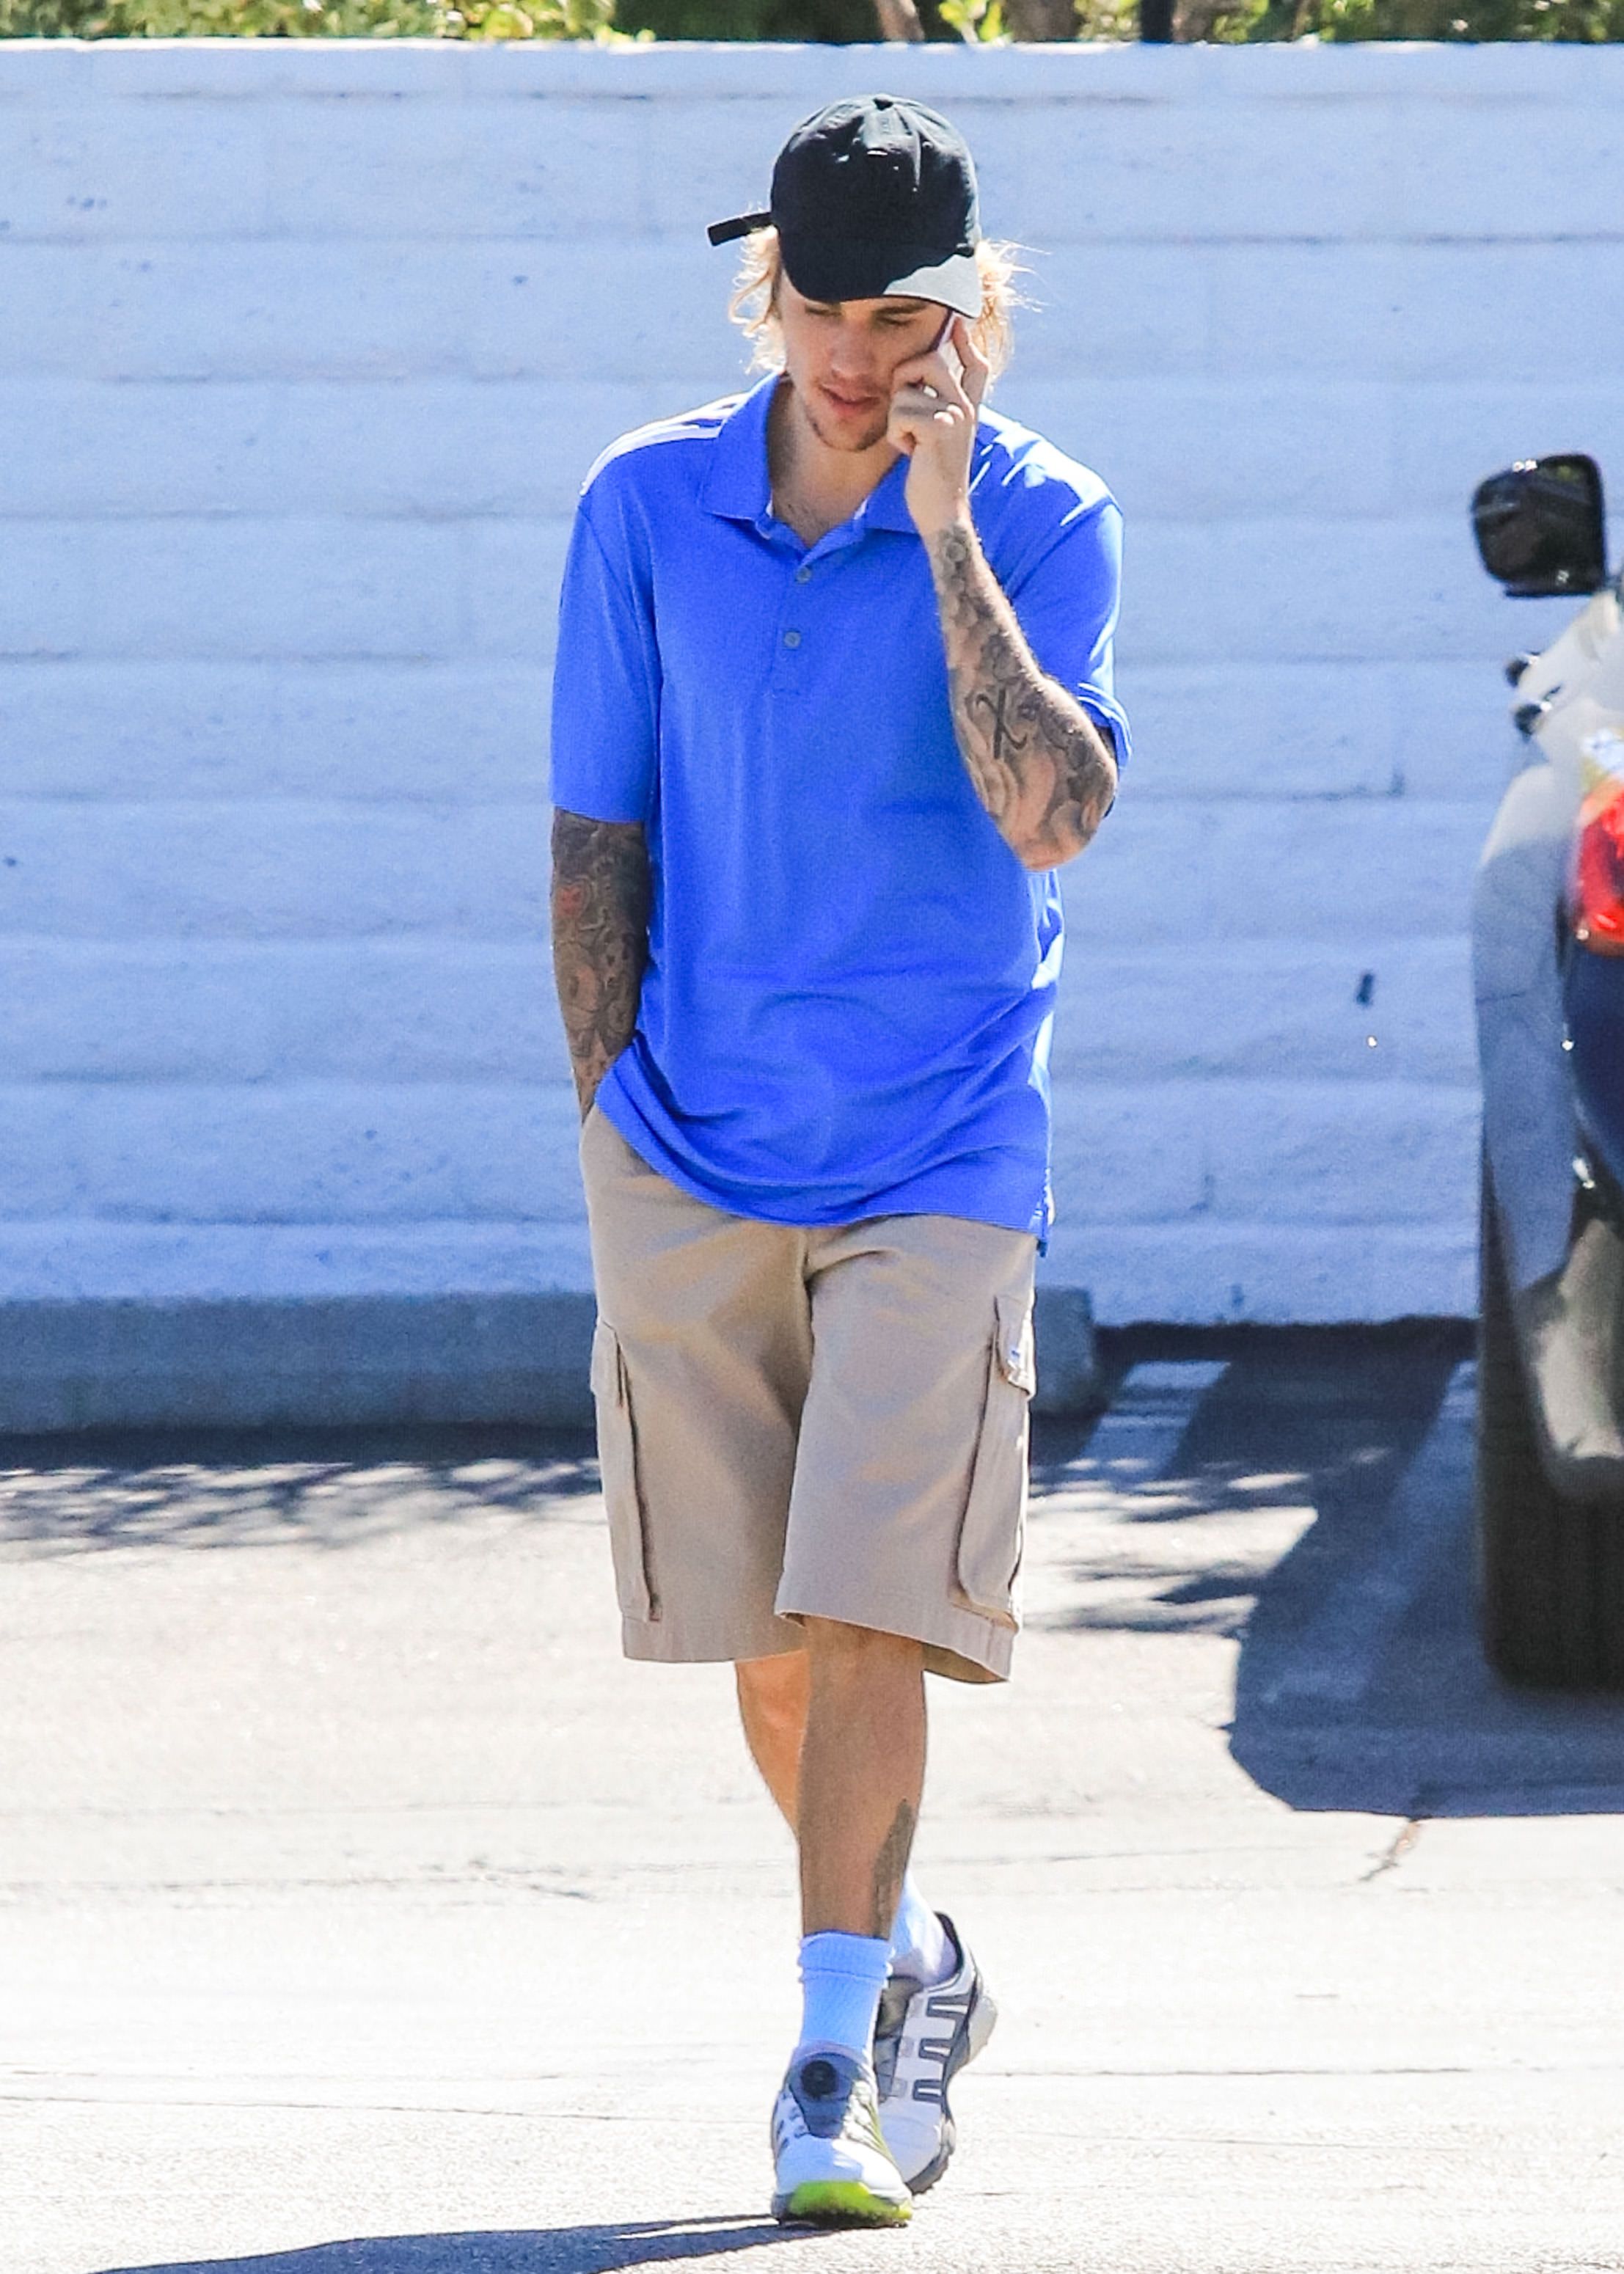 Bieber Wearing Cargo Shorts Mean We Can All Wear Now?